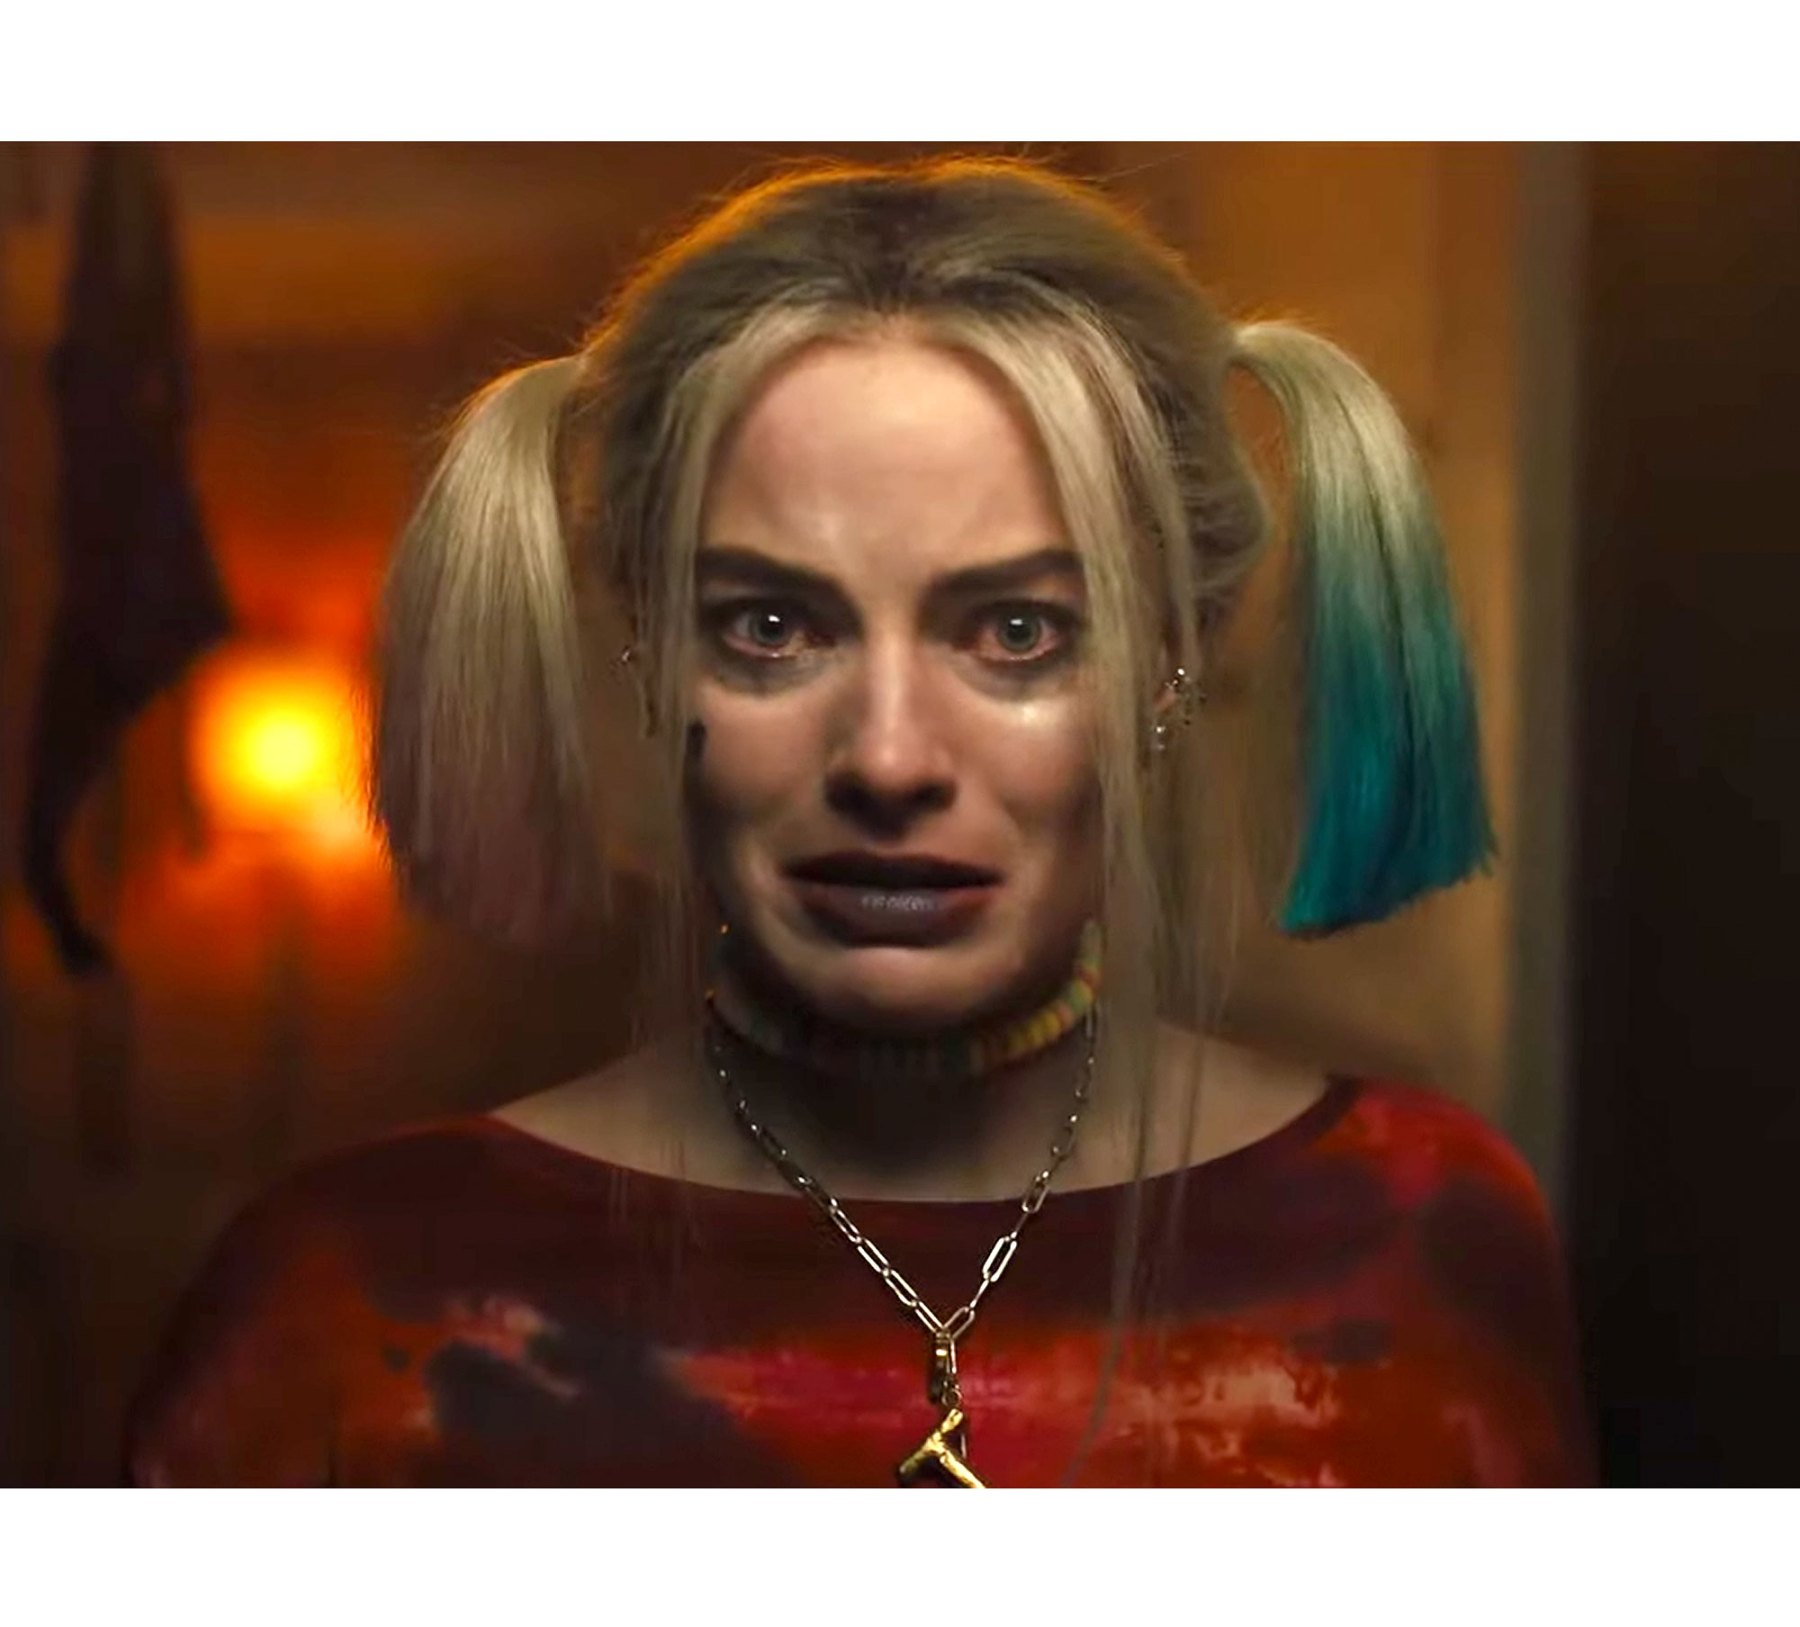 Upcoming Harley Quinn Movie Trailer Can Only Be Seen In 